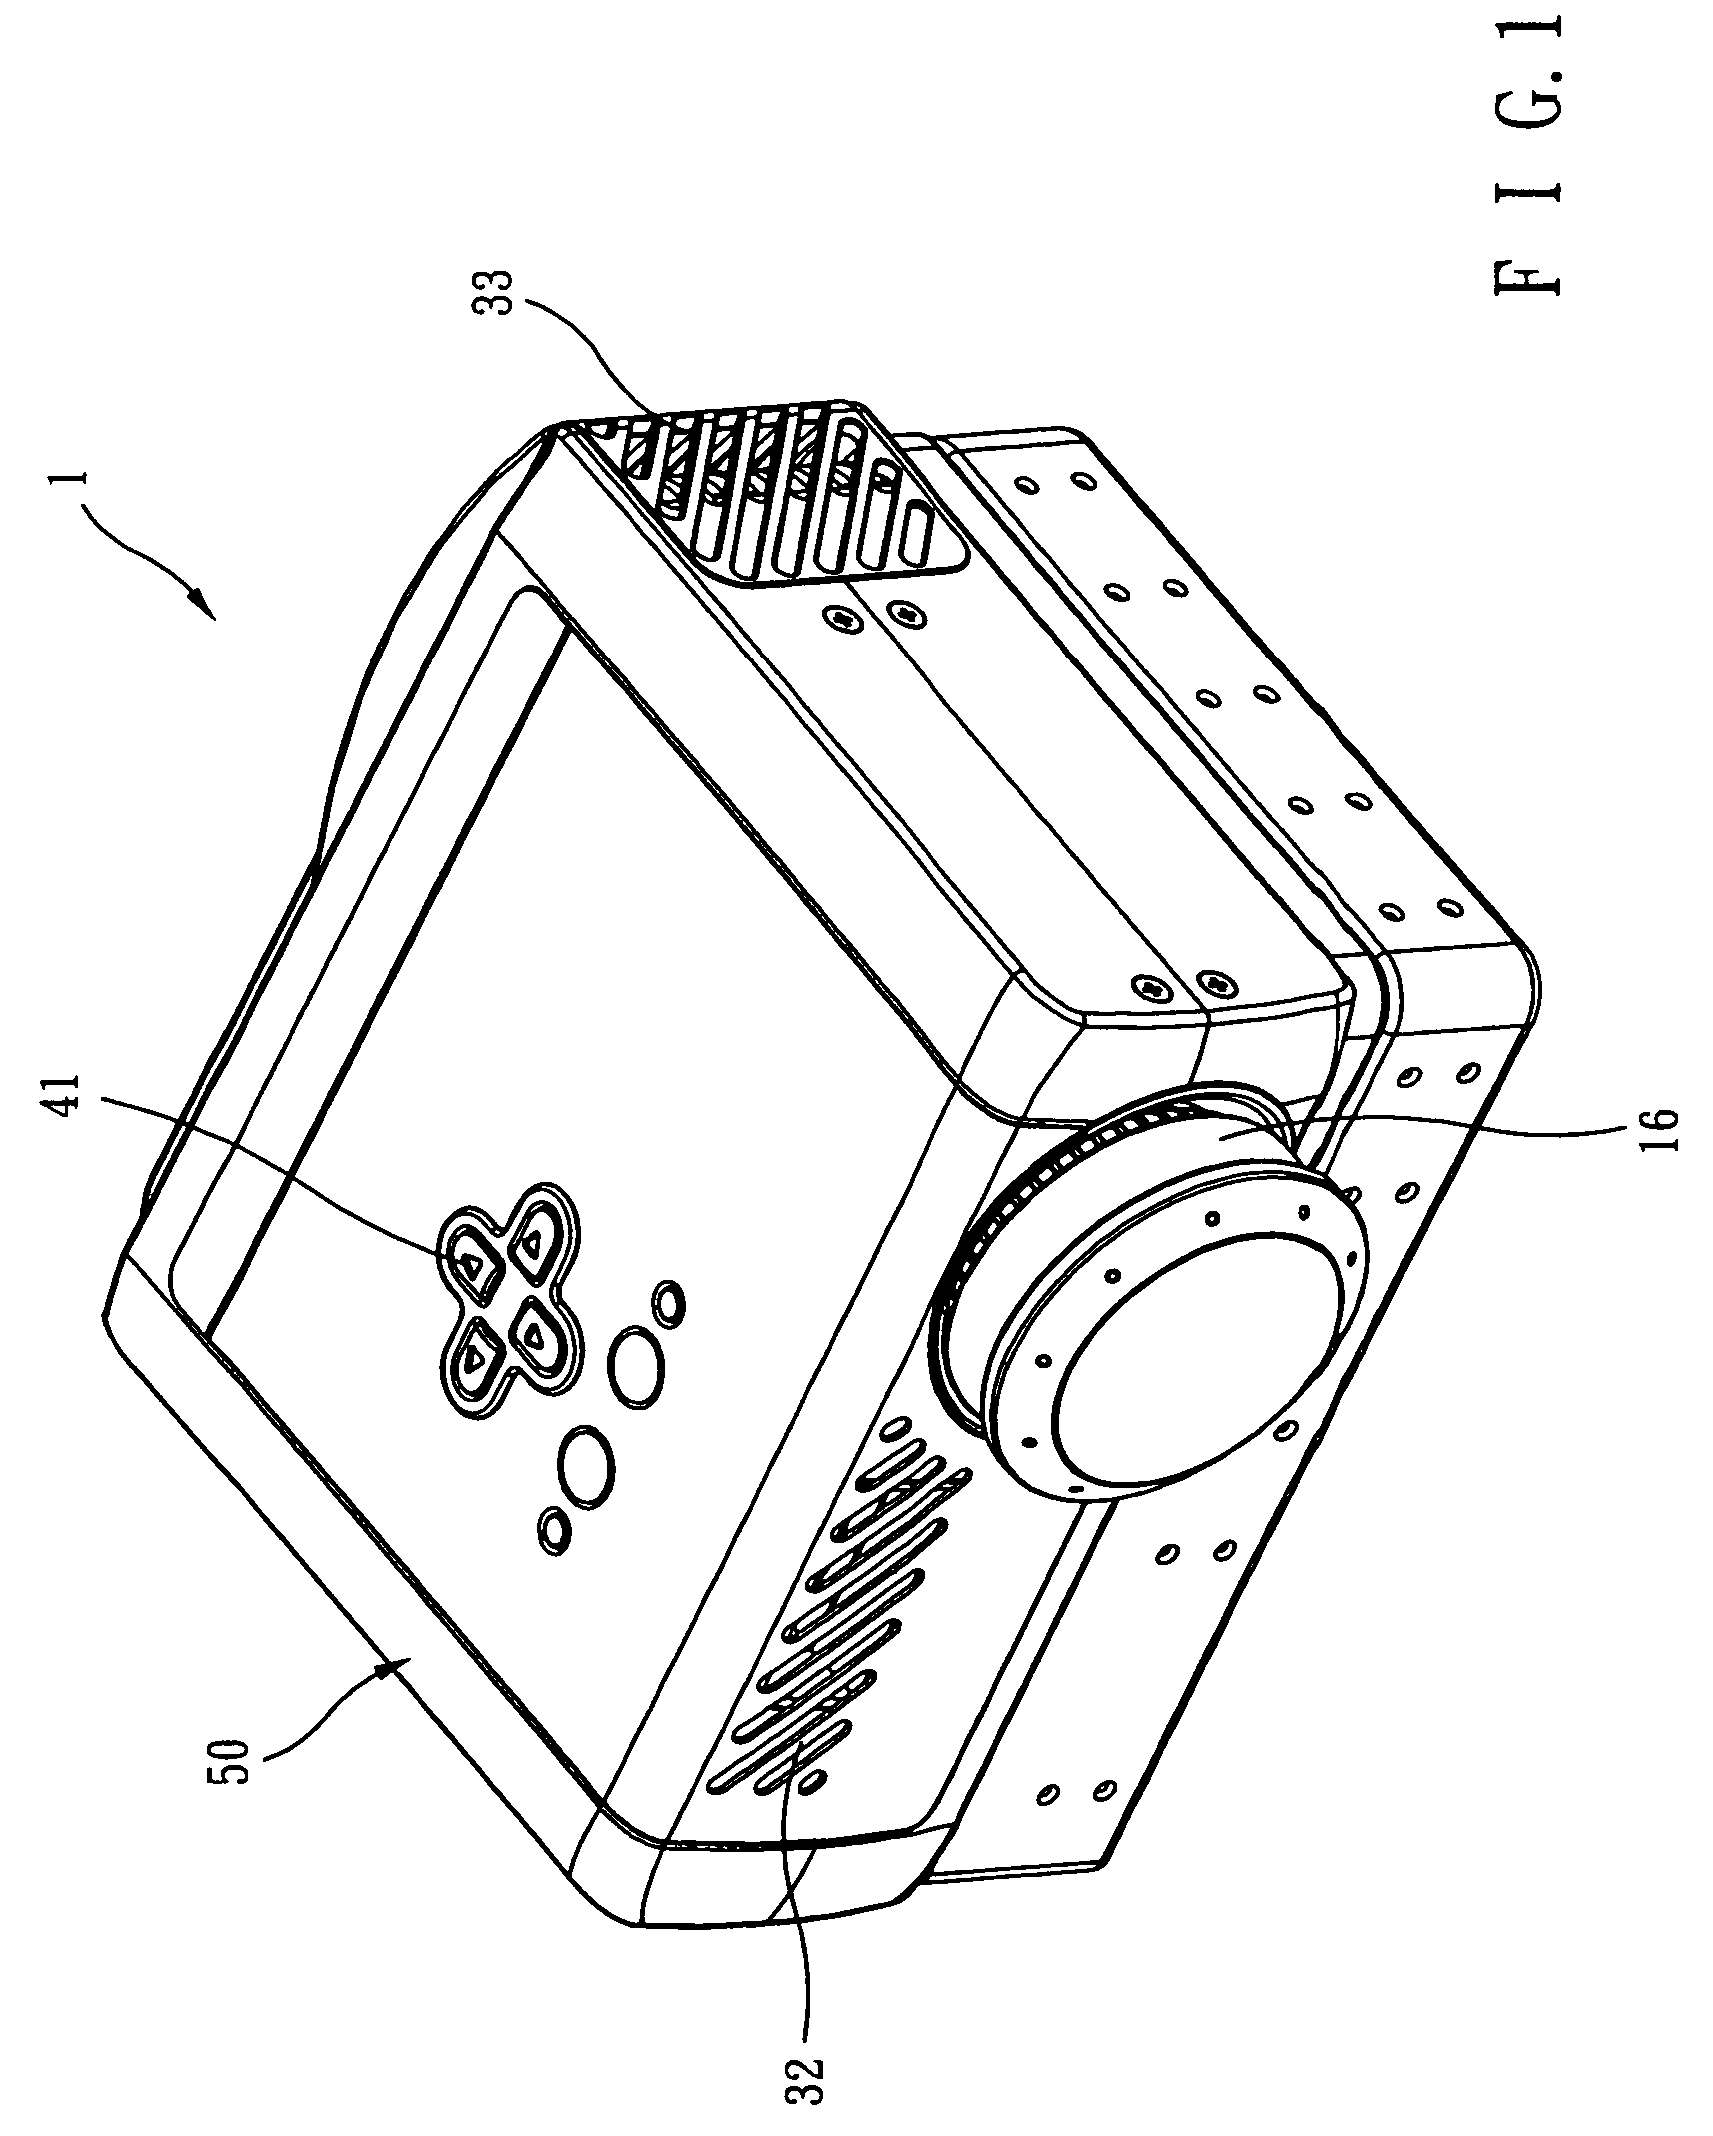 Image projector having a LED light source